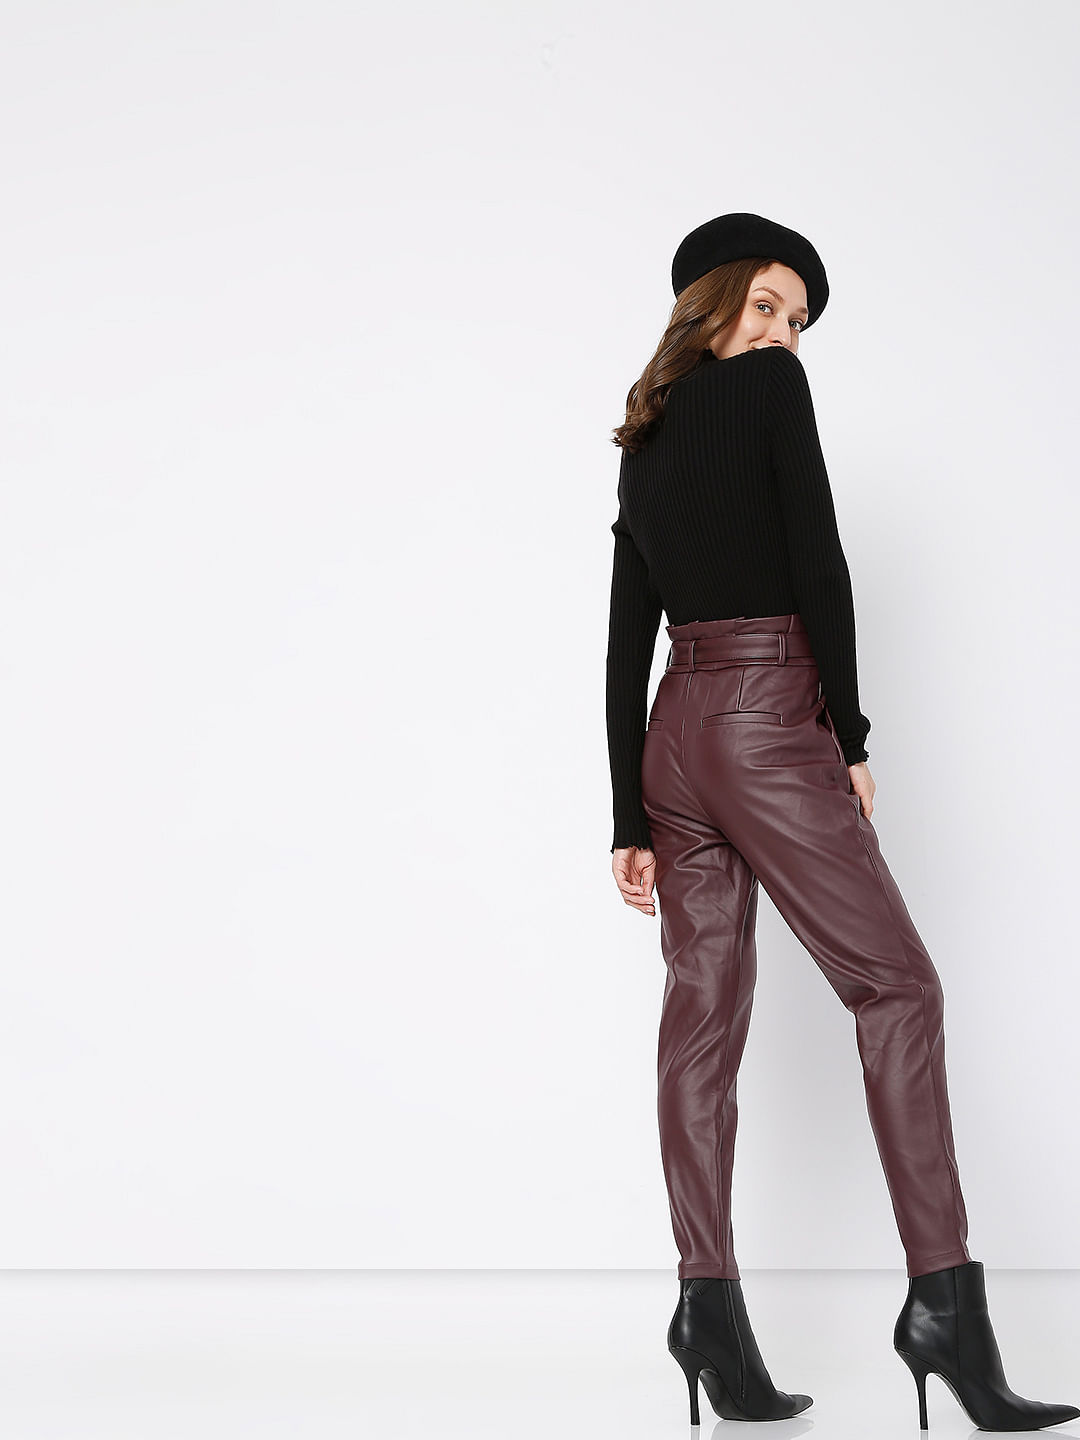 Black Faux Leather Pants/ High Waisted Women Leather Pants/ Pleated Leather  Trousers for Women - Etsy